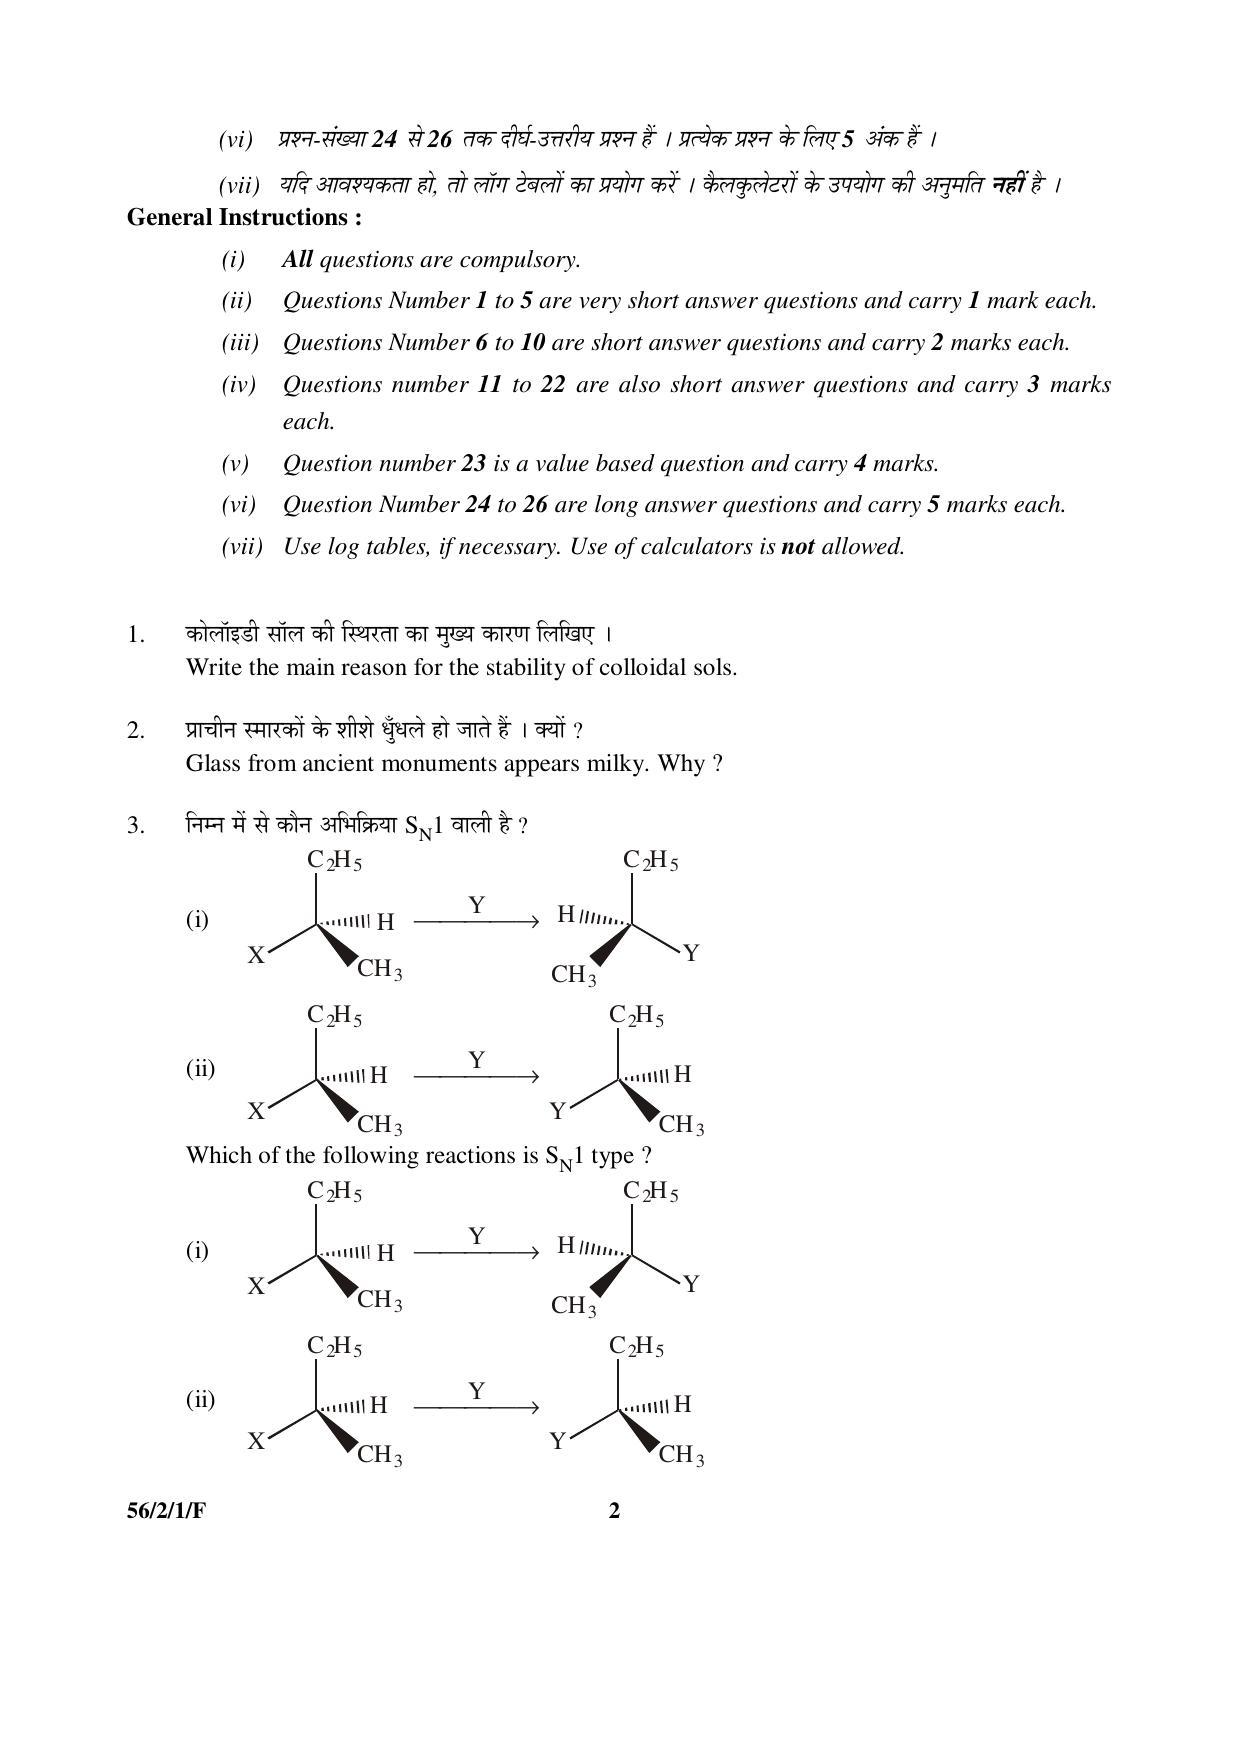 CBSE Class 12 56-2-1-F _Chemistry_ 2016 Question Paper - Page 2